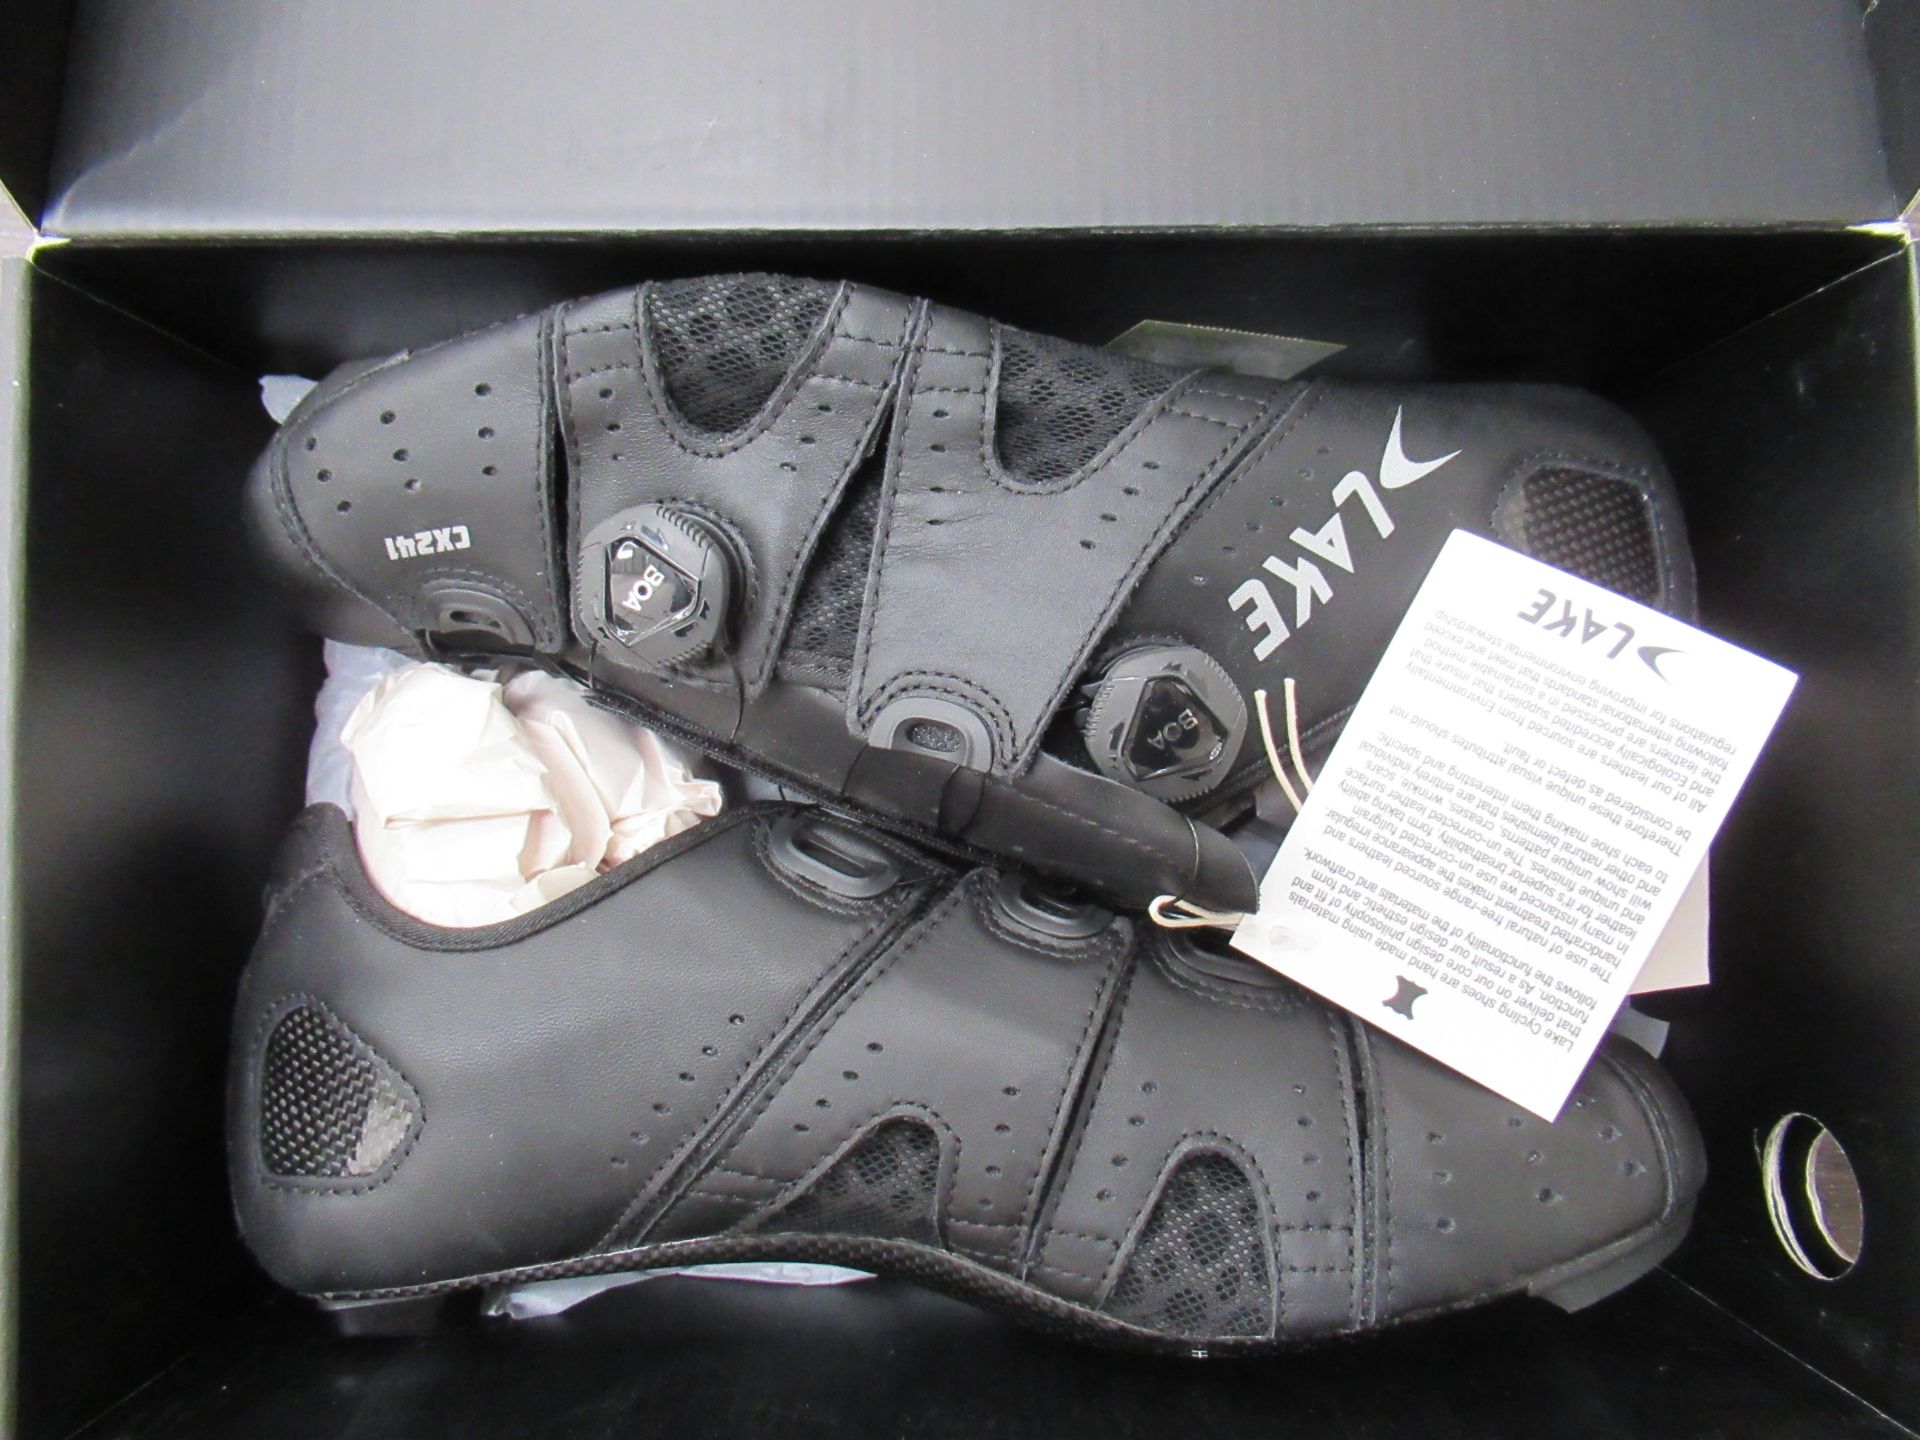 Pair of Lake CX241-X cycling shoes (black/silver) - boxed EU size 45.5 (RRP£295) - Image 4 of 4